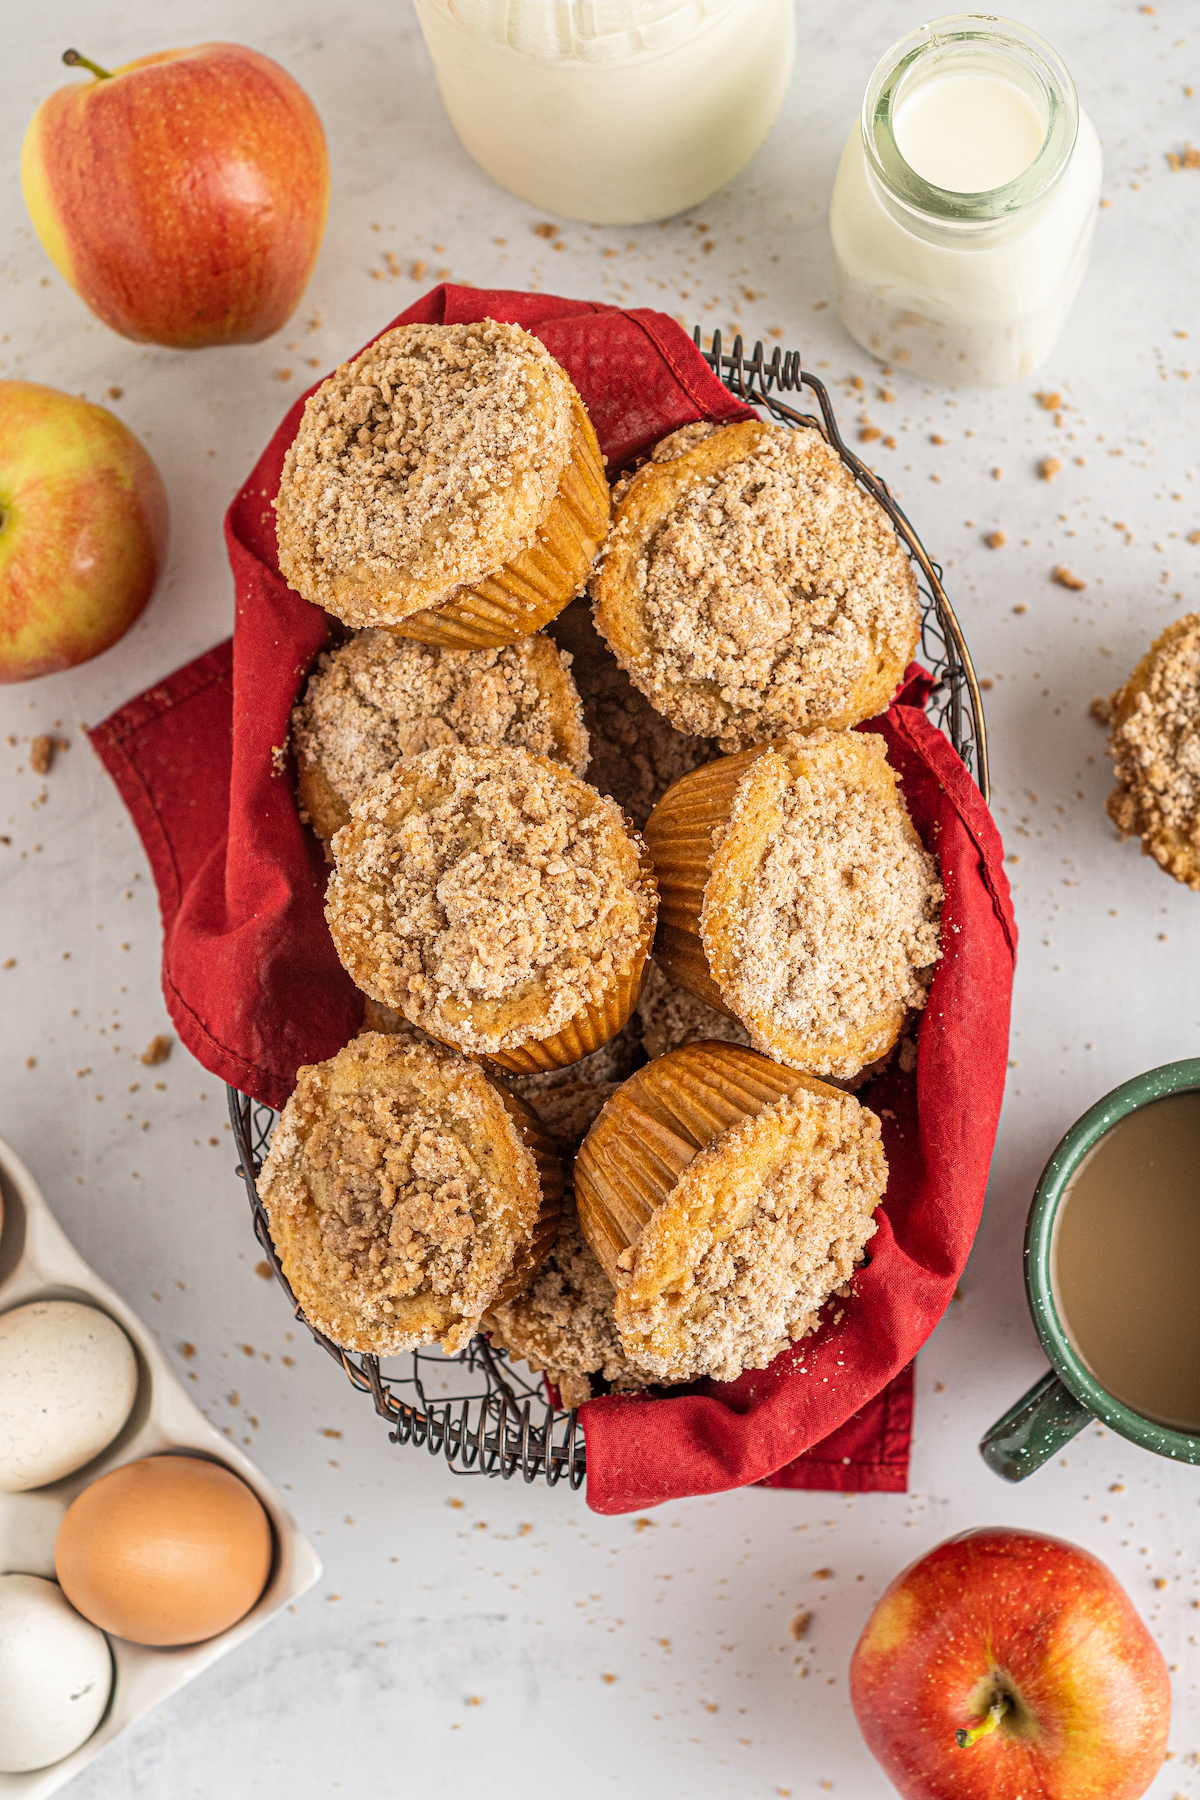 A wire basket filled with apple cinnamon muffins.